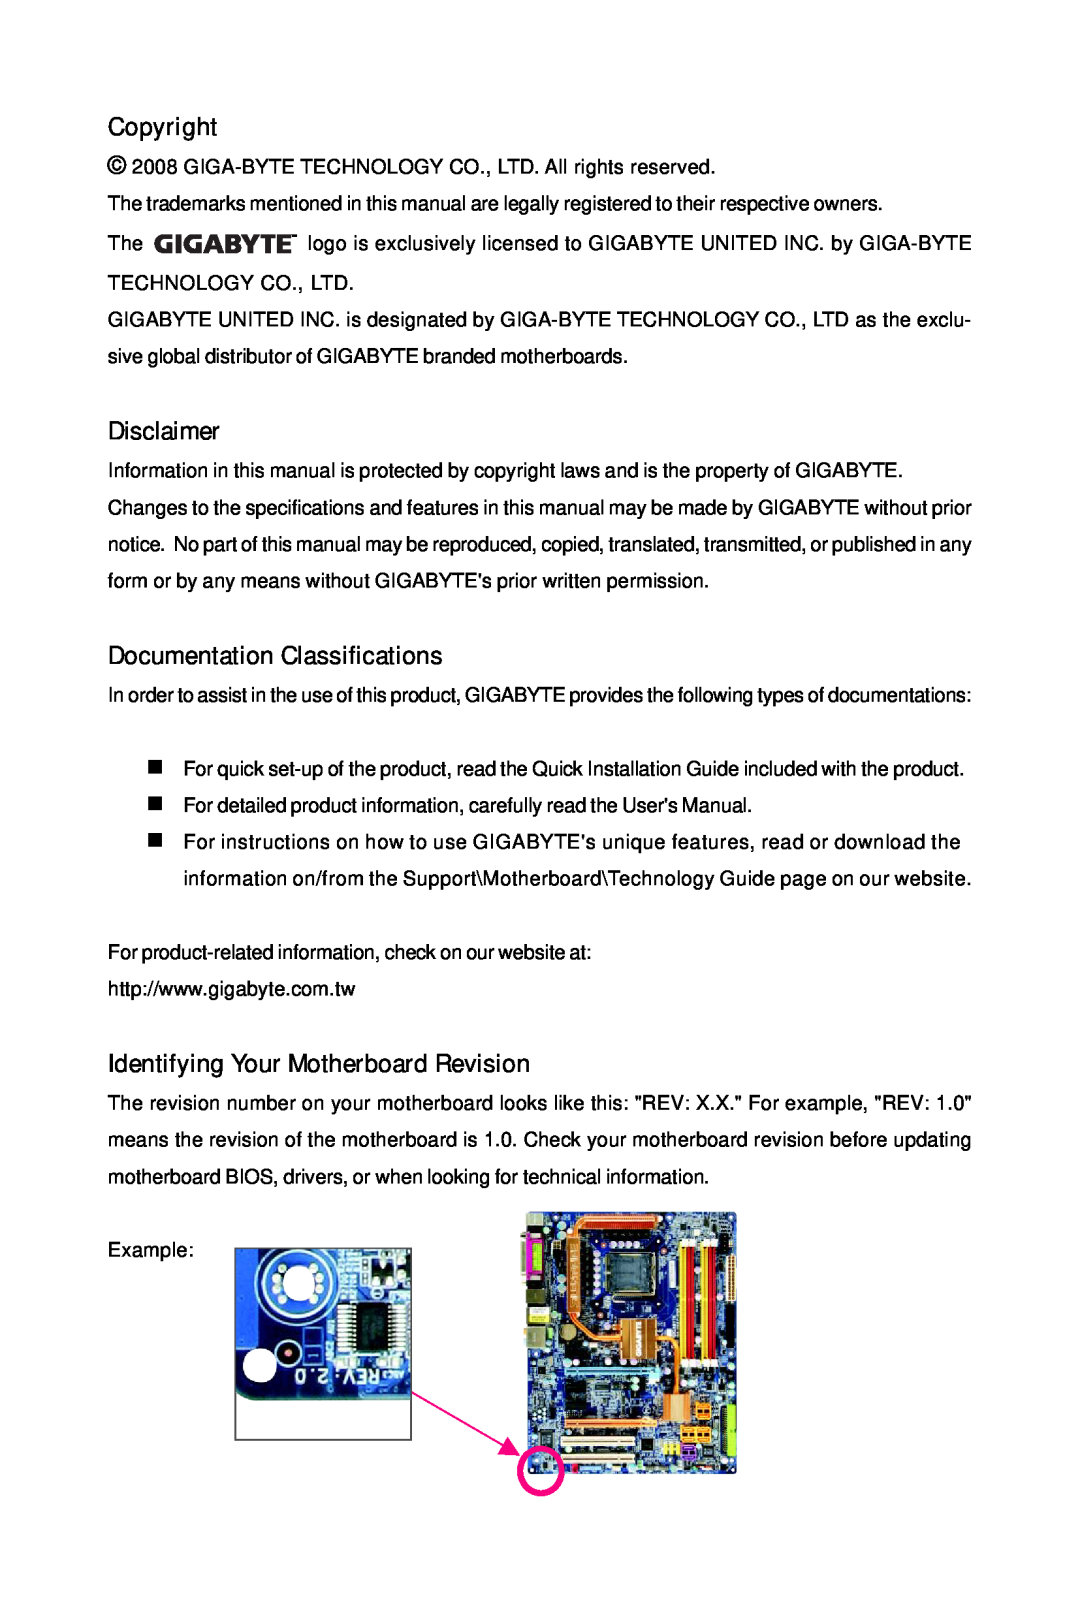 Gigabyte GA-EP45-UD3P Copyright, Disclaimer, Documentation Classifications, Identifying Your Motherboard Revision, Example 